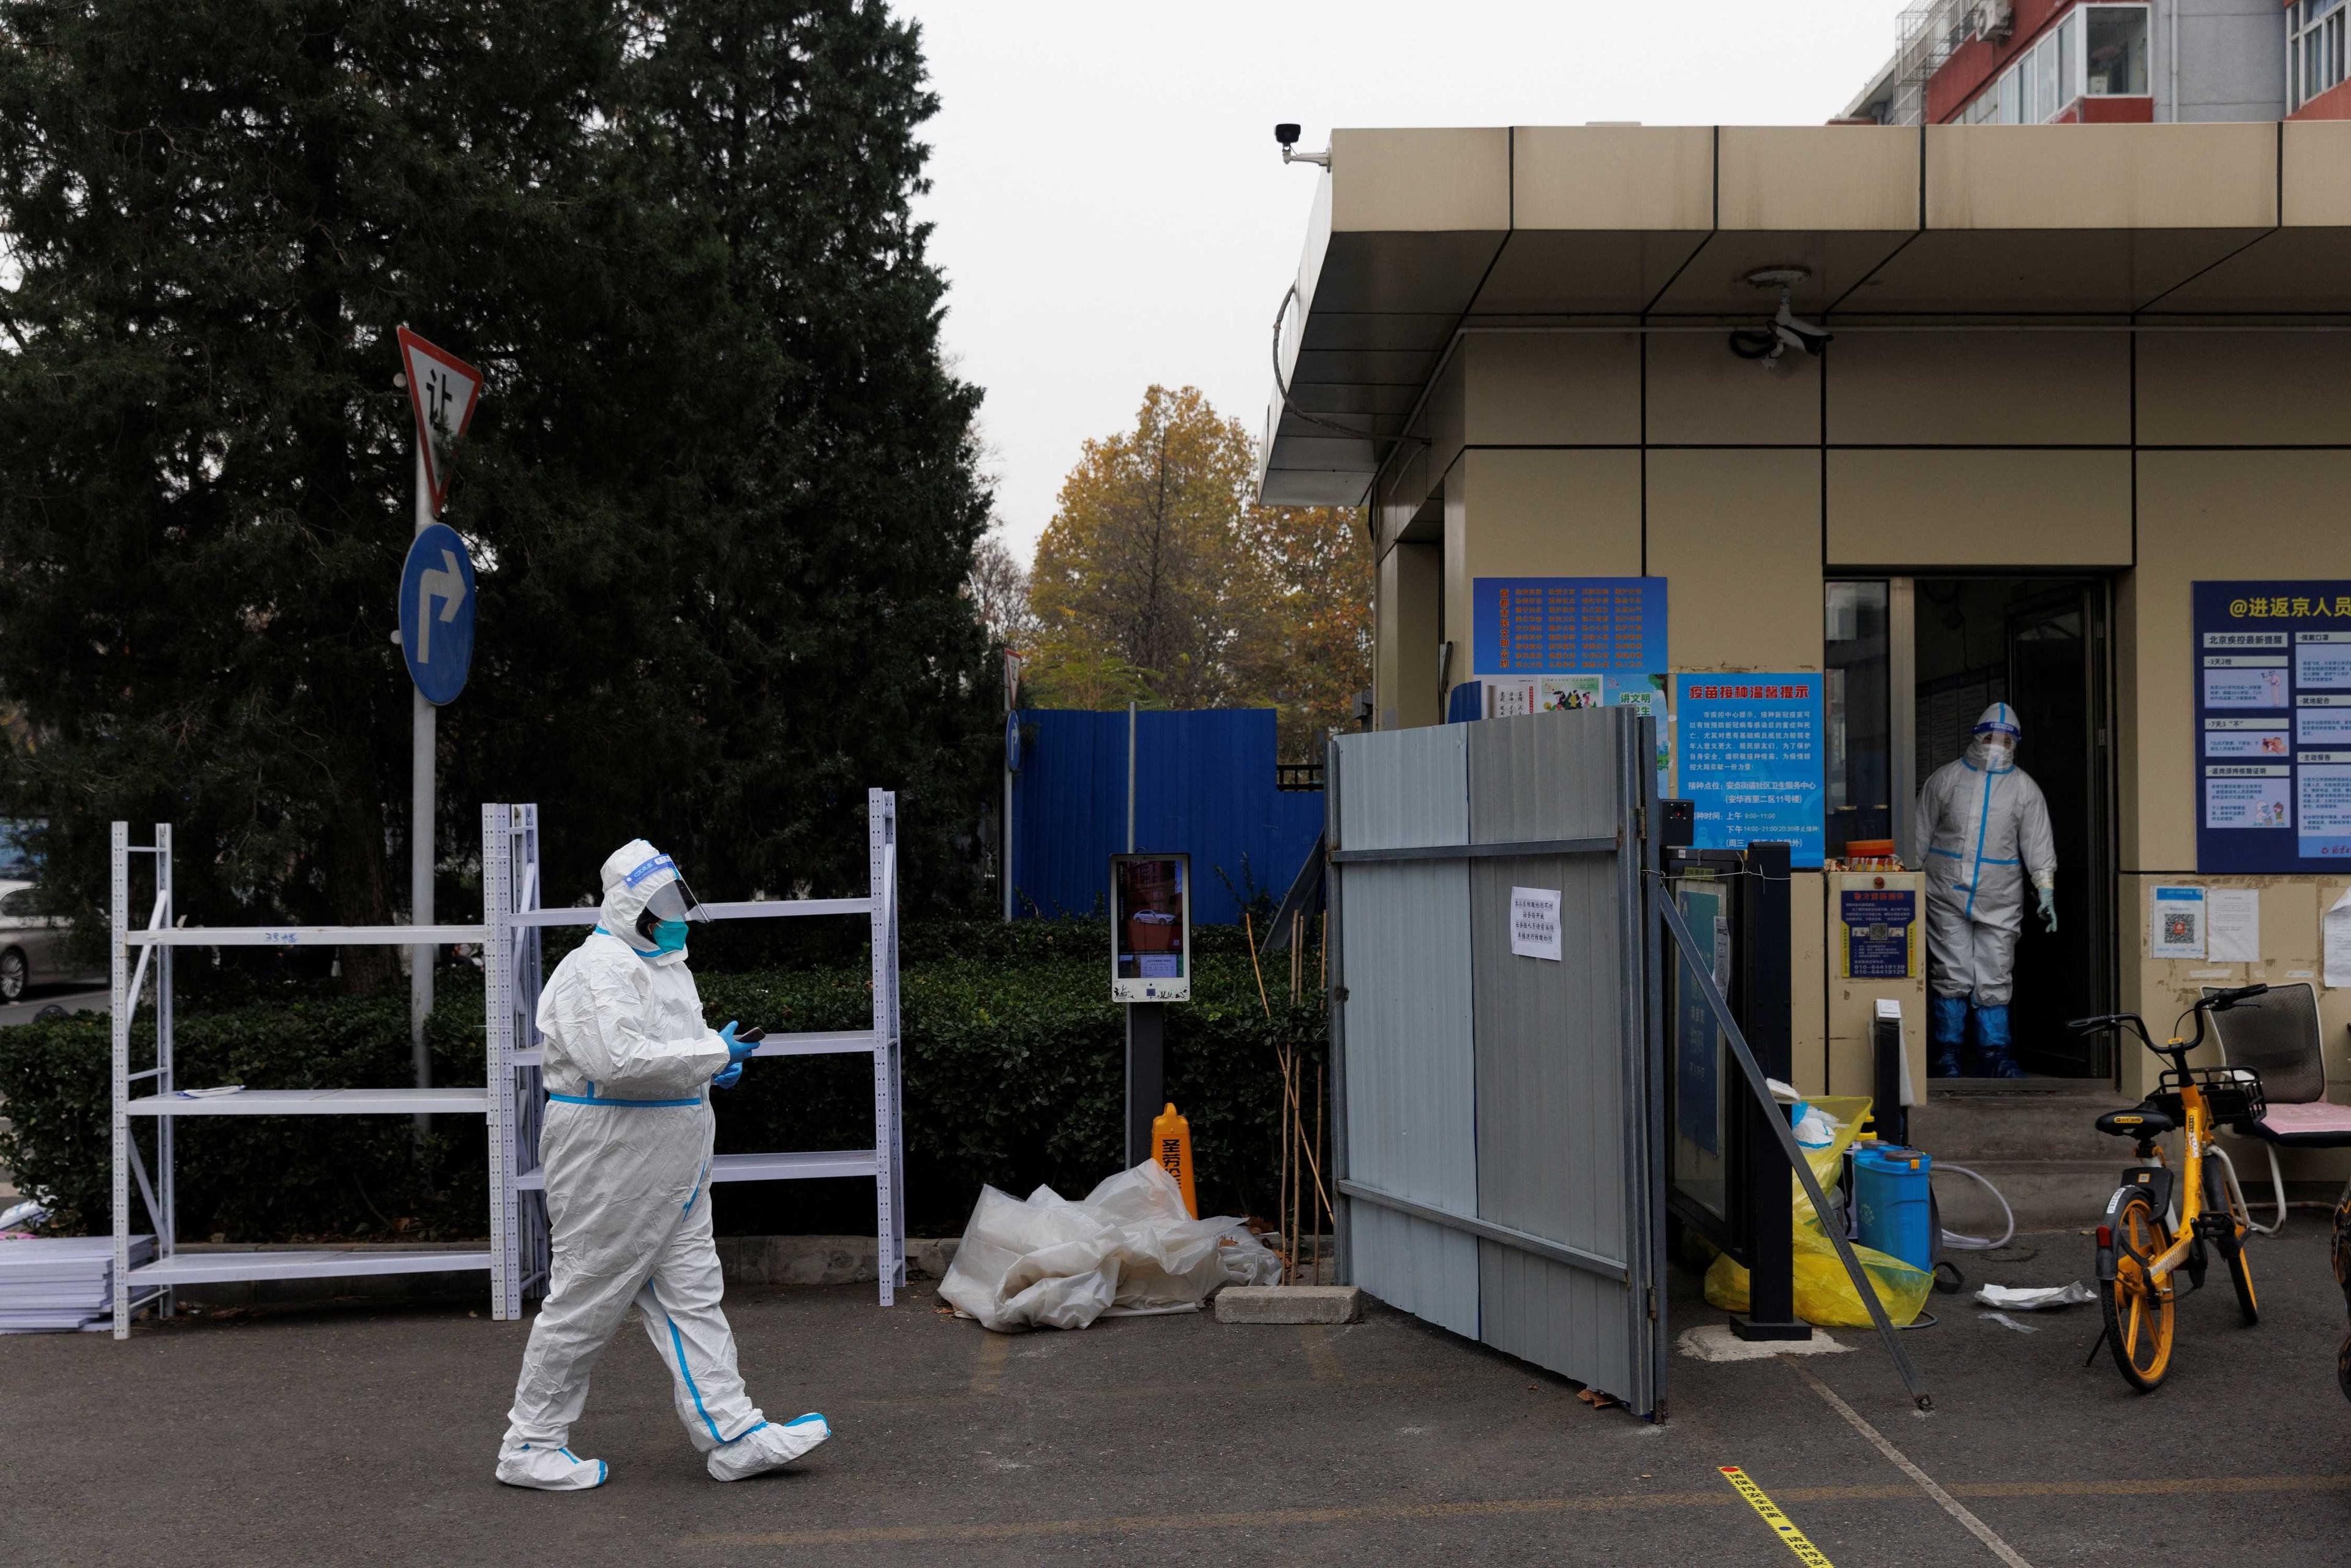 Pandemic prevention workers in protective suits are seen at the gate to a locked-down residential compound as outbreaks of Covid-19 continue in Beijing, China on Nov 18. Photo: Reuters